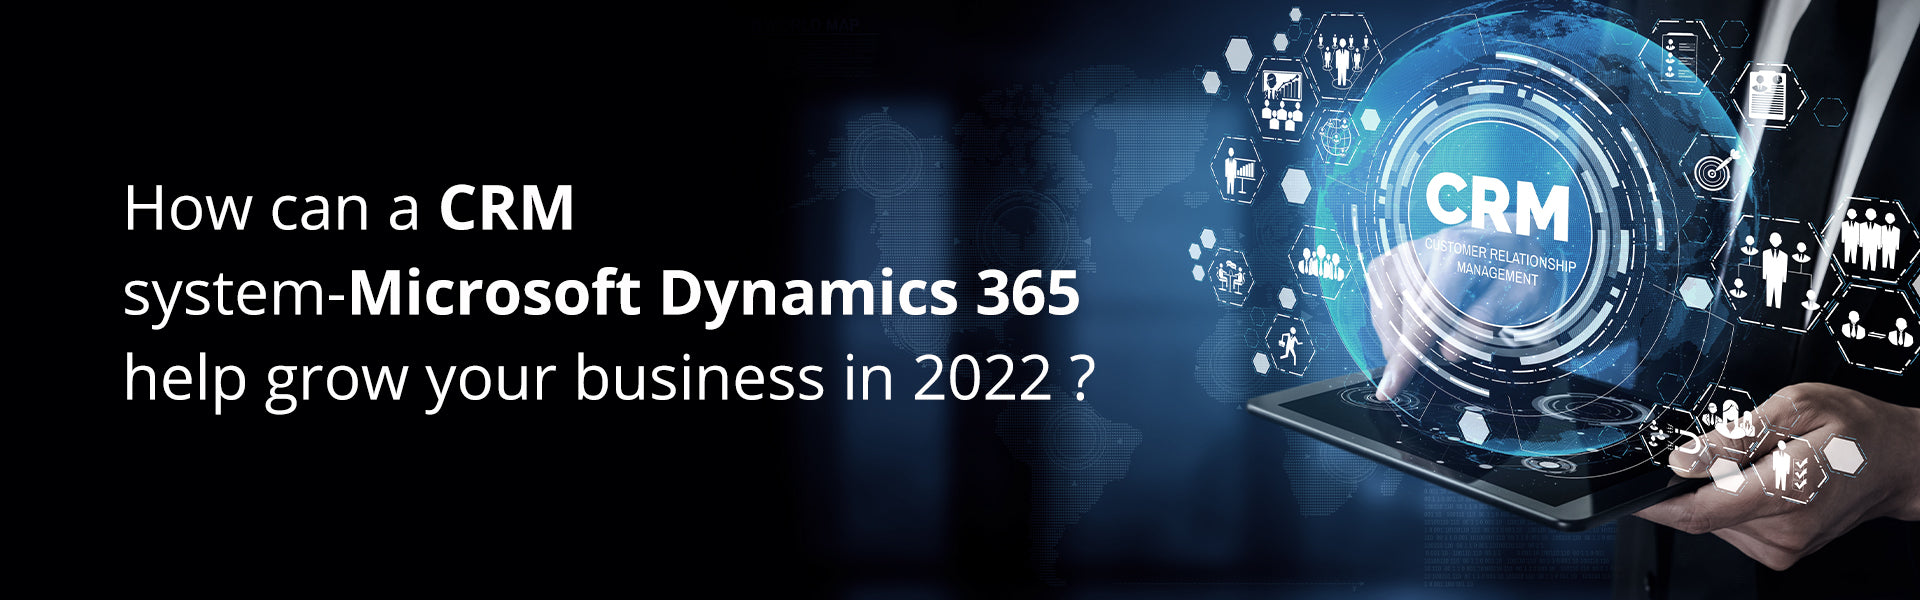 How can a CRM system- Microsoft Dynamics 365 help grow your business in 2022?